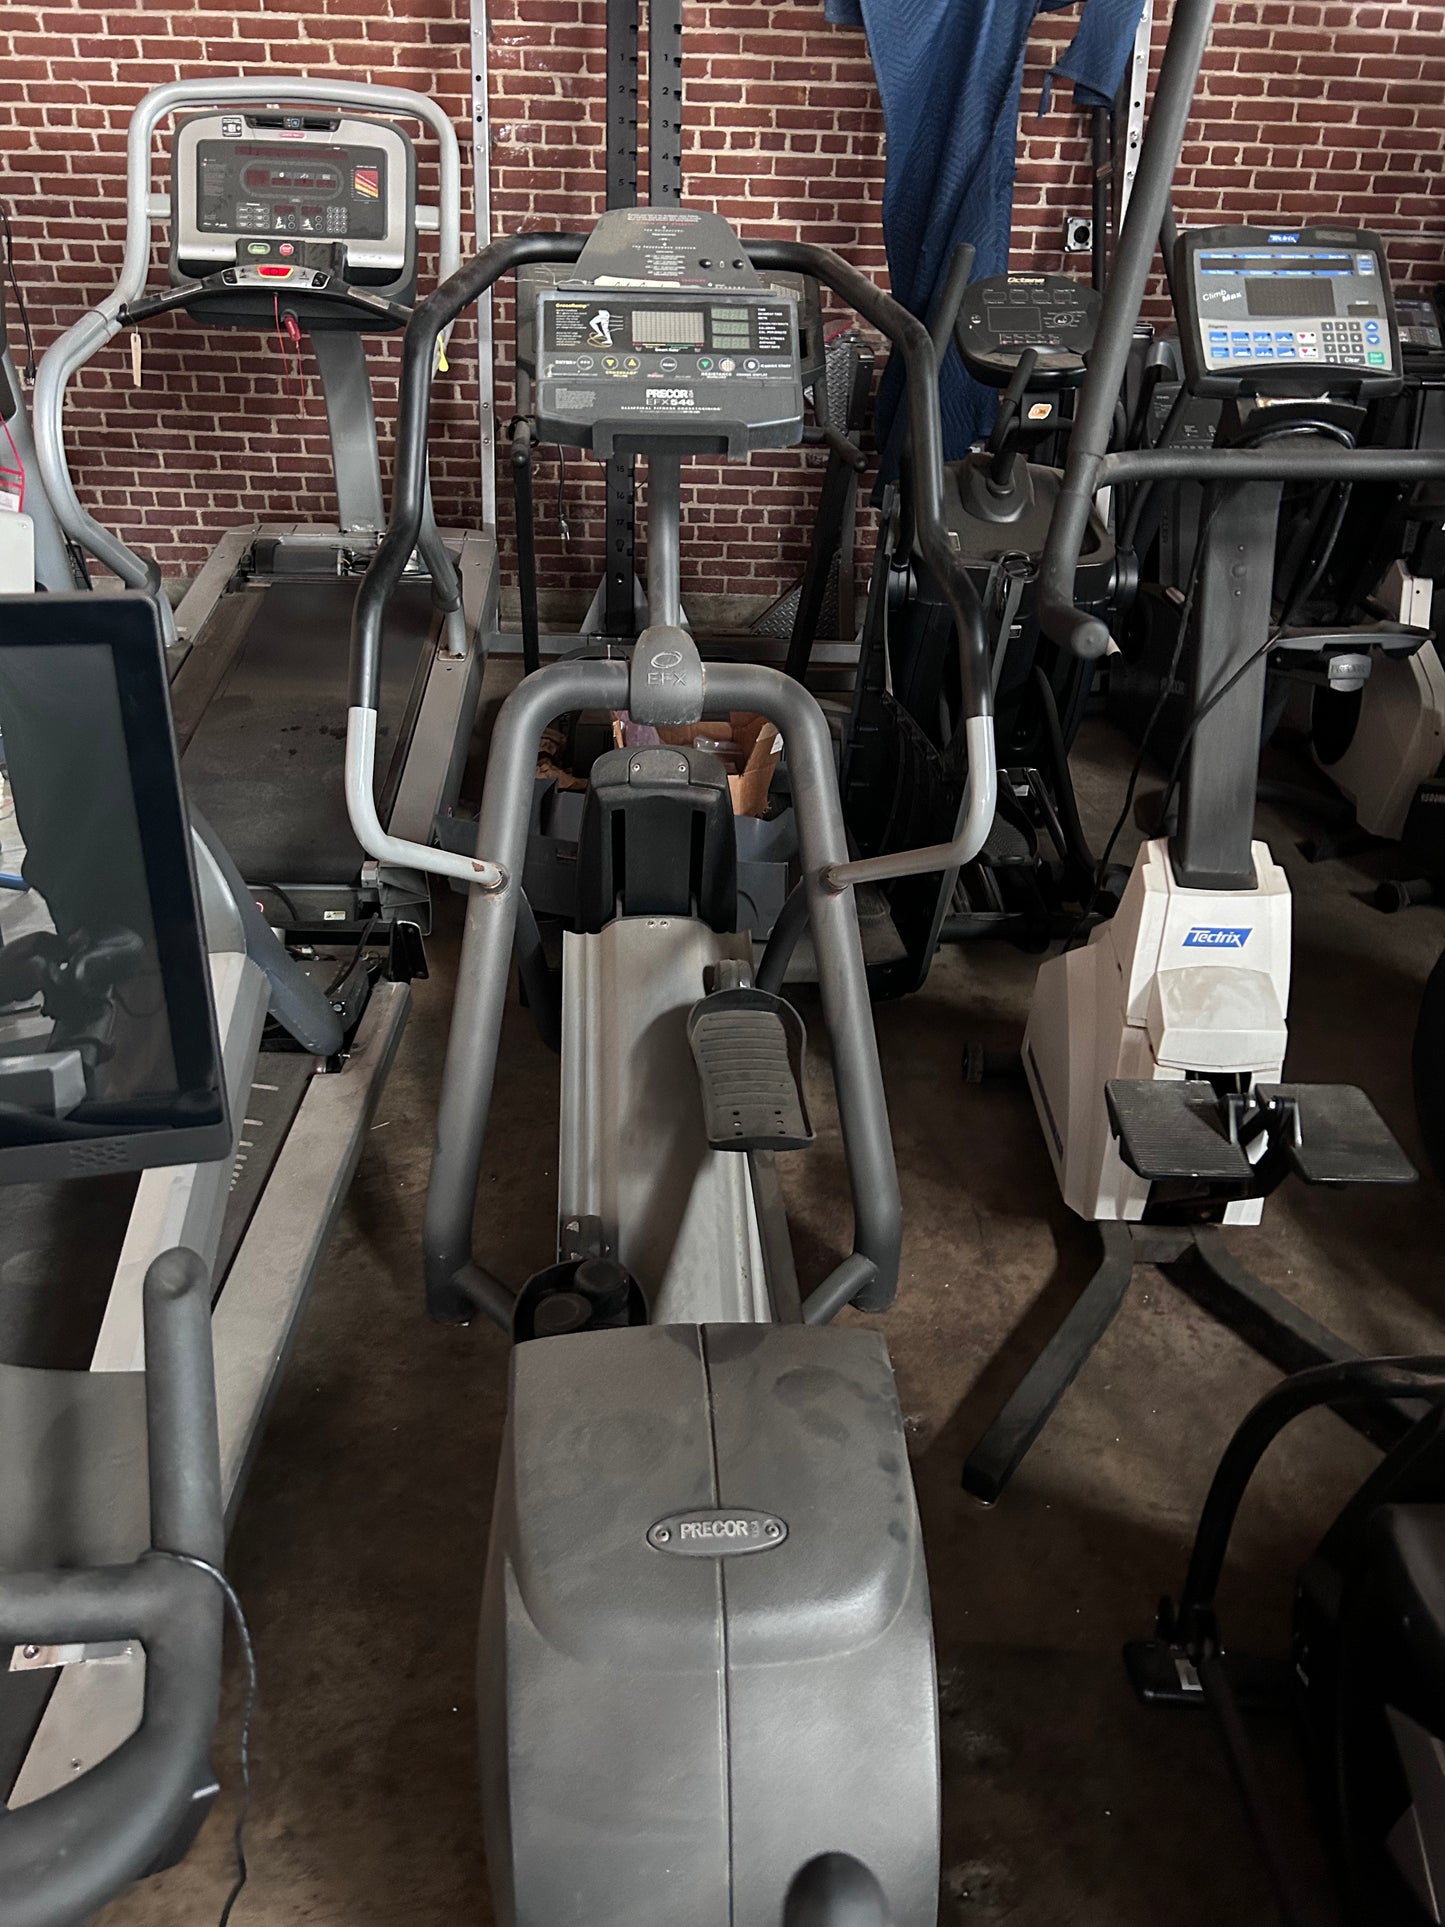 Pre-Owned Precor EFX 546 Version 1 Elliptical - ExerciseUnlimited